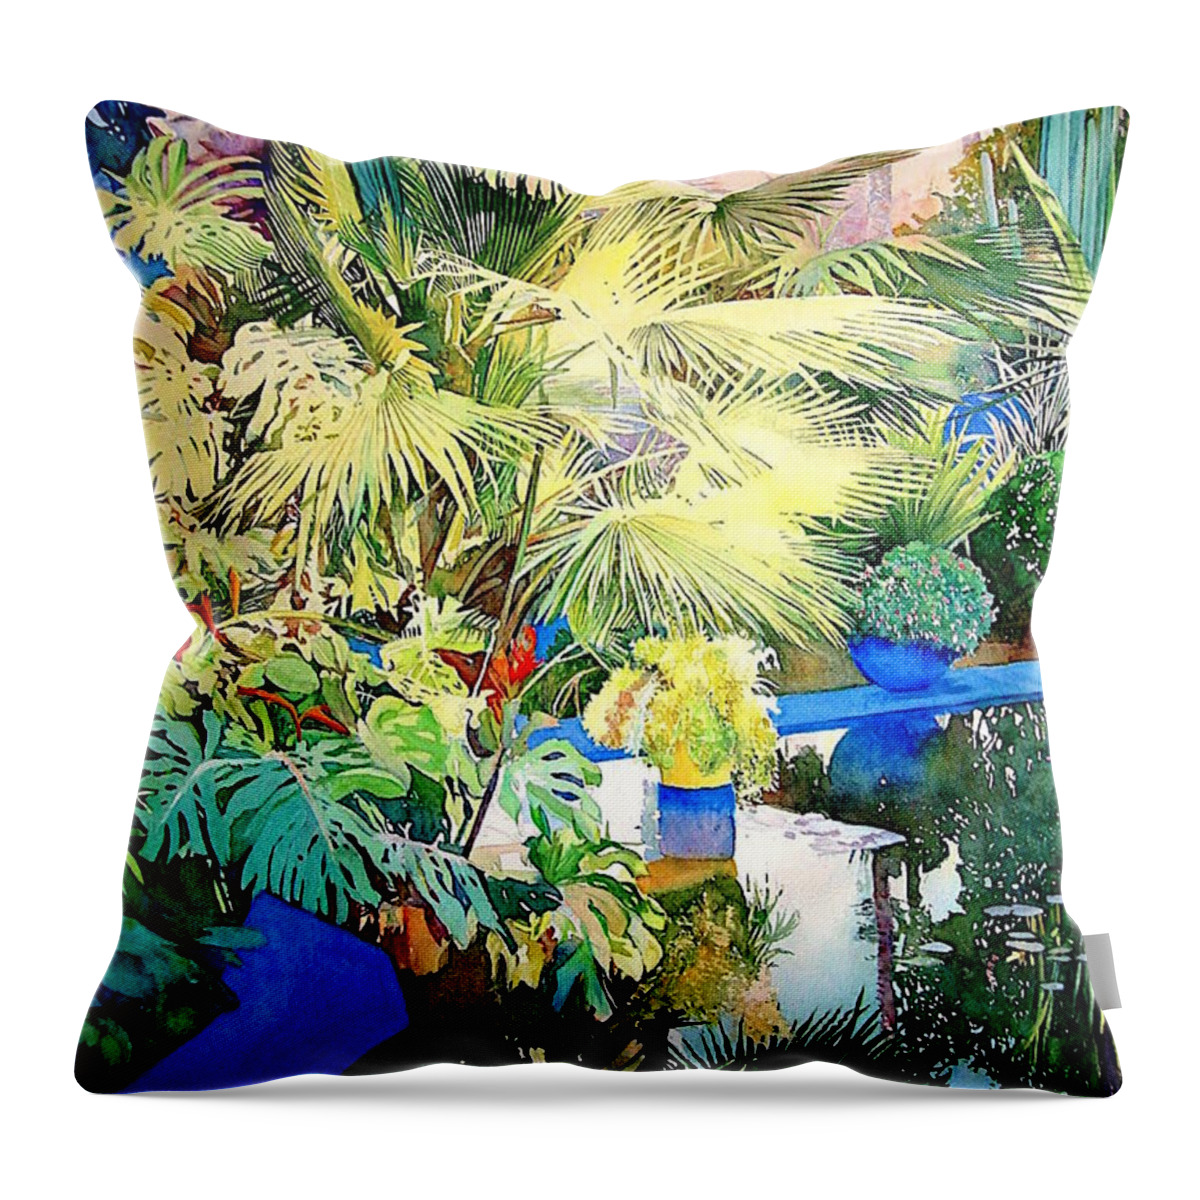  Exotic Throw Pillow featuring the painting Bassin - Jardin Majorelle - Marrakech - Maroc by Francoise Chauray